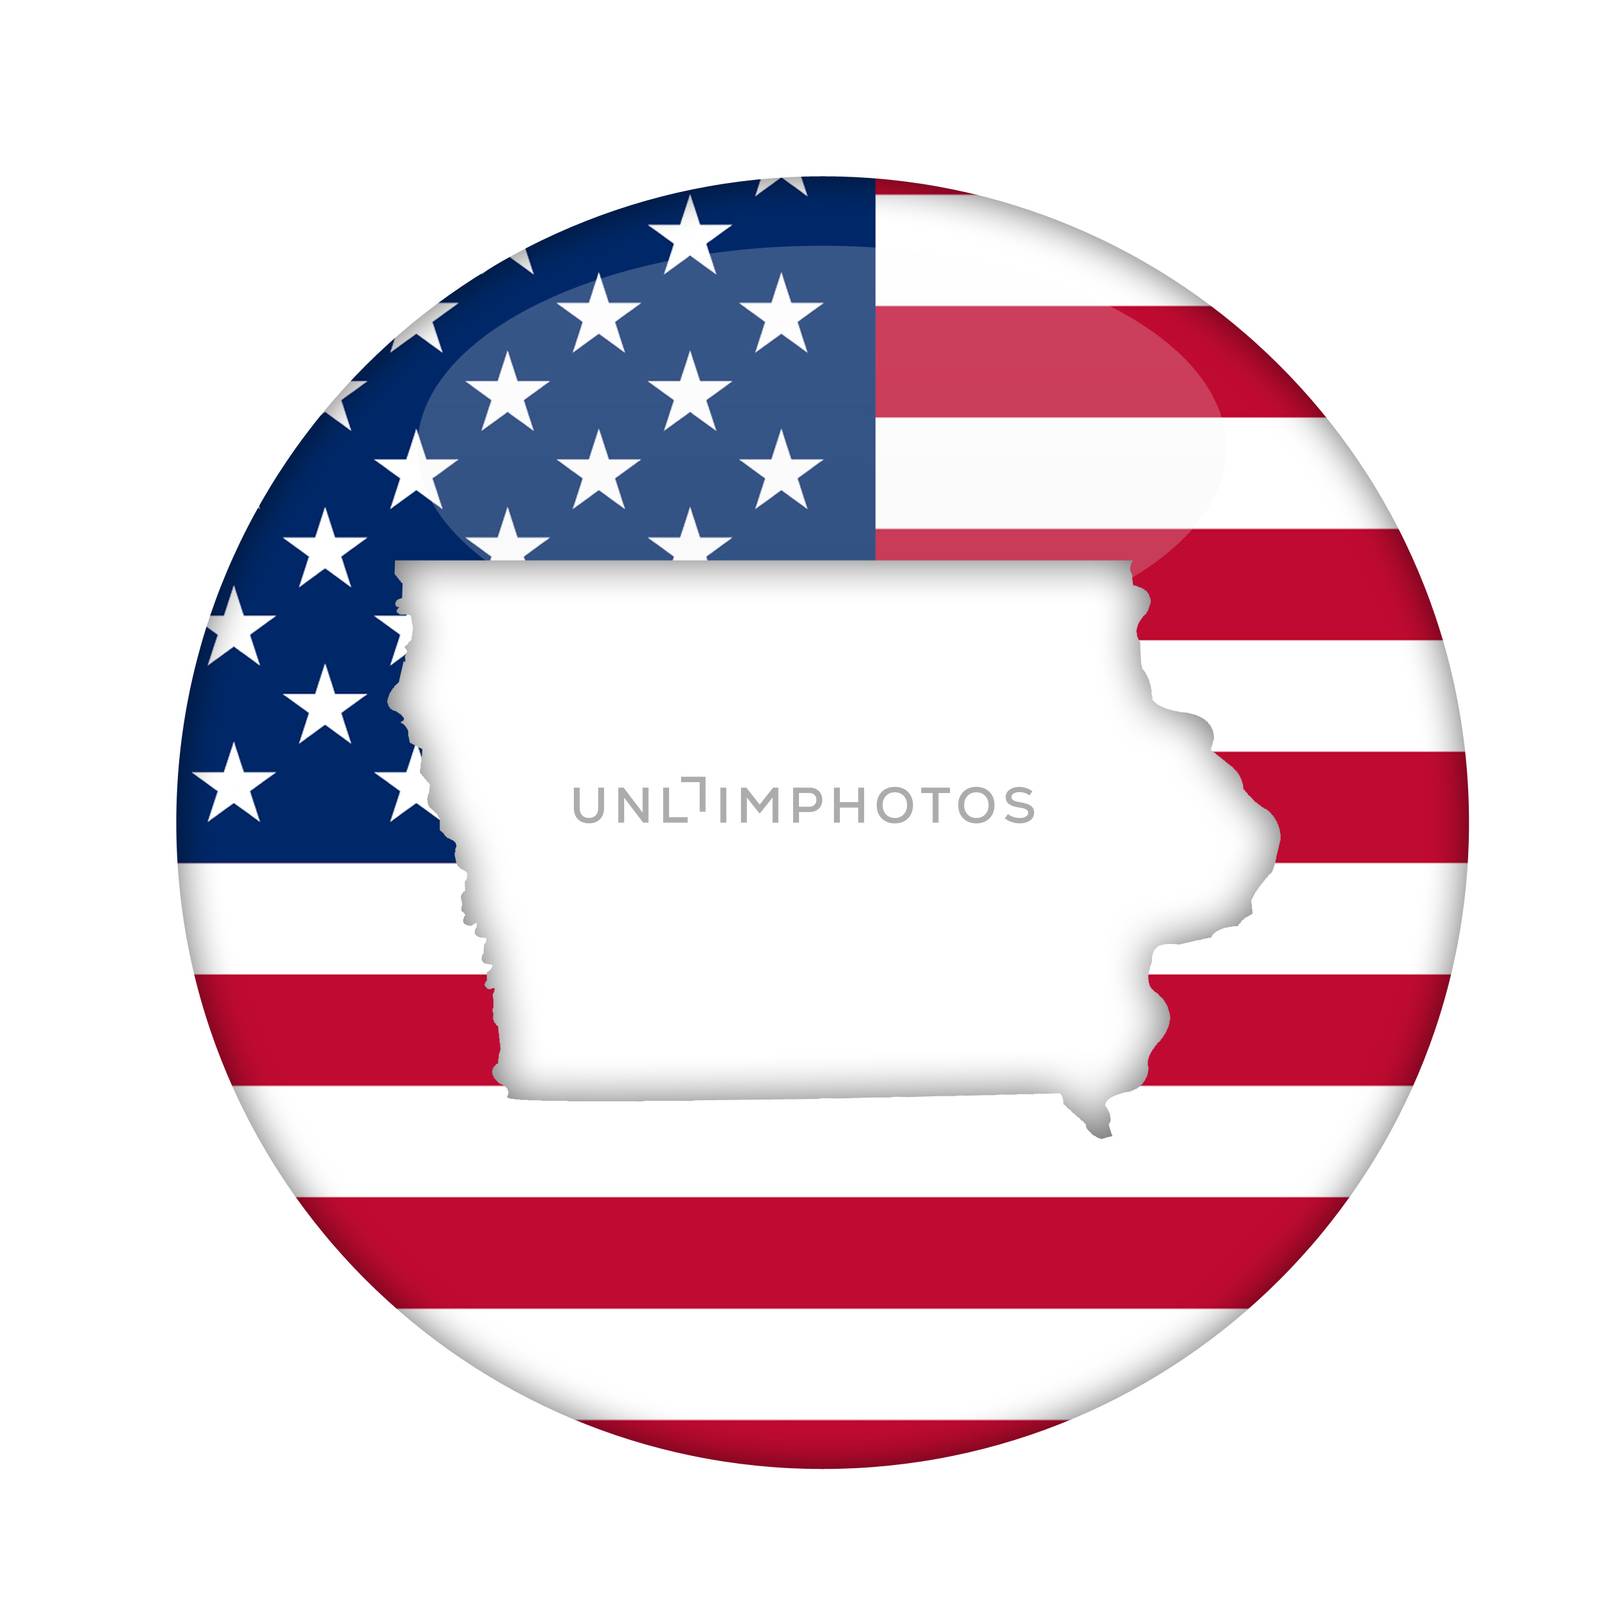 Iowa state of America badge isolated on a white background.